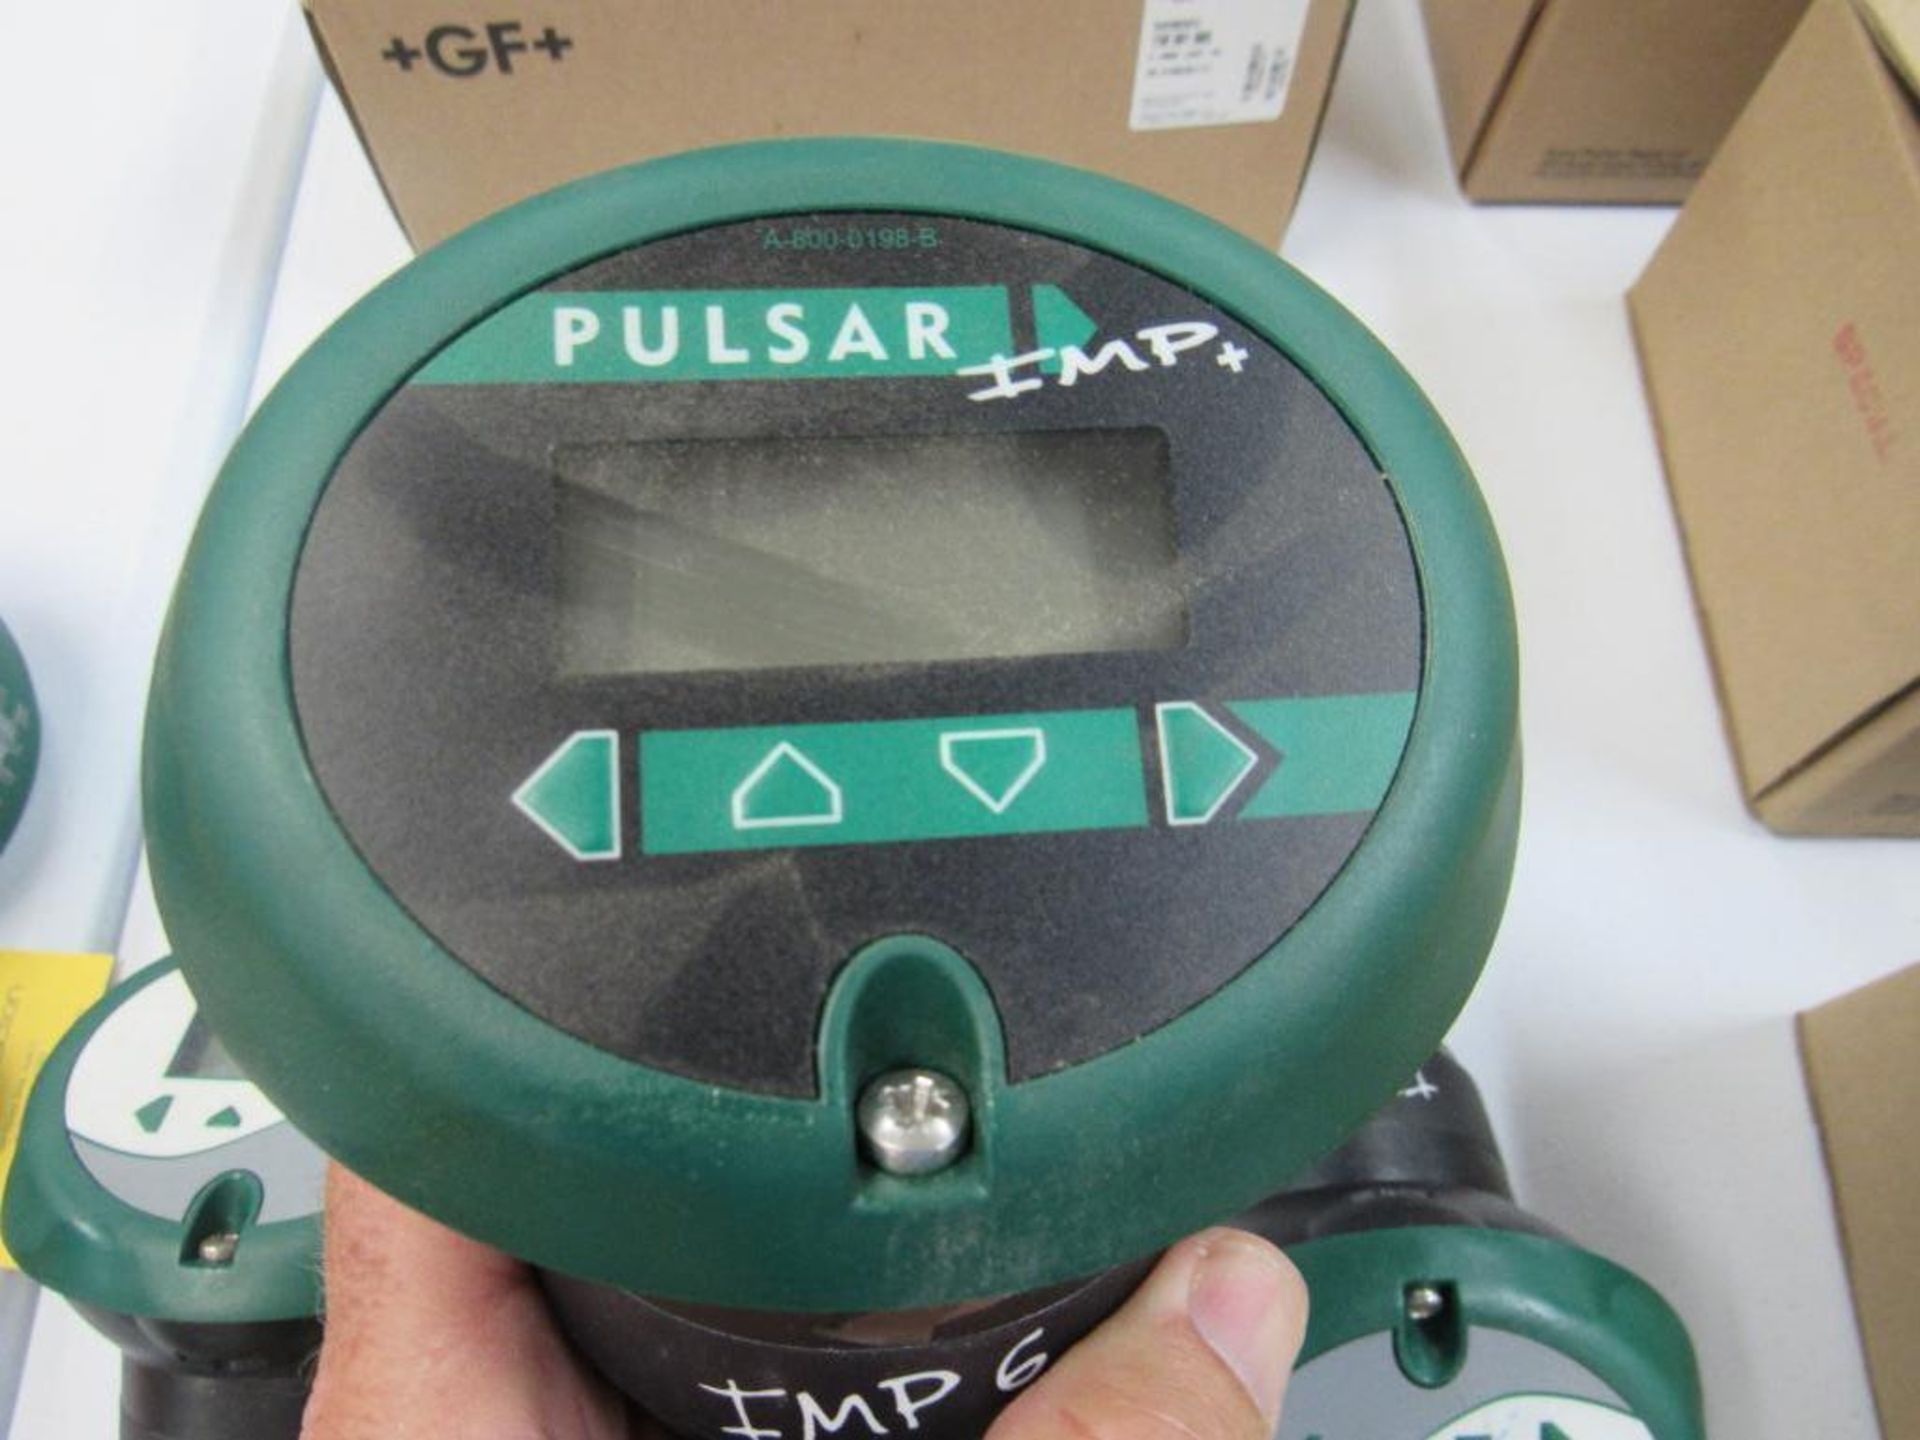 PULSAR (X3) IMP6 - Non contacting ultrasonic level measurement and digital echo processing - Image 3 of 3